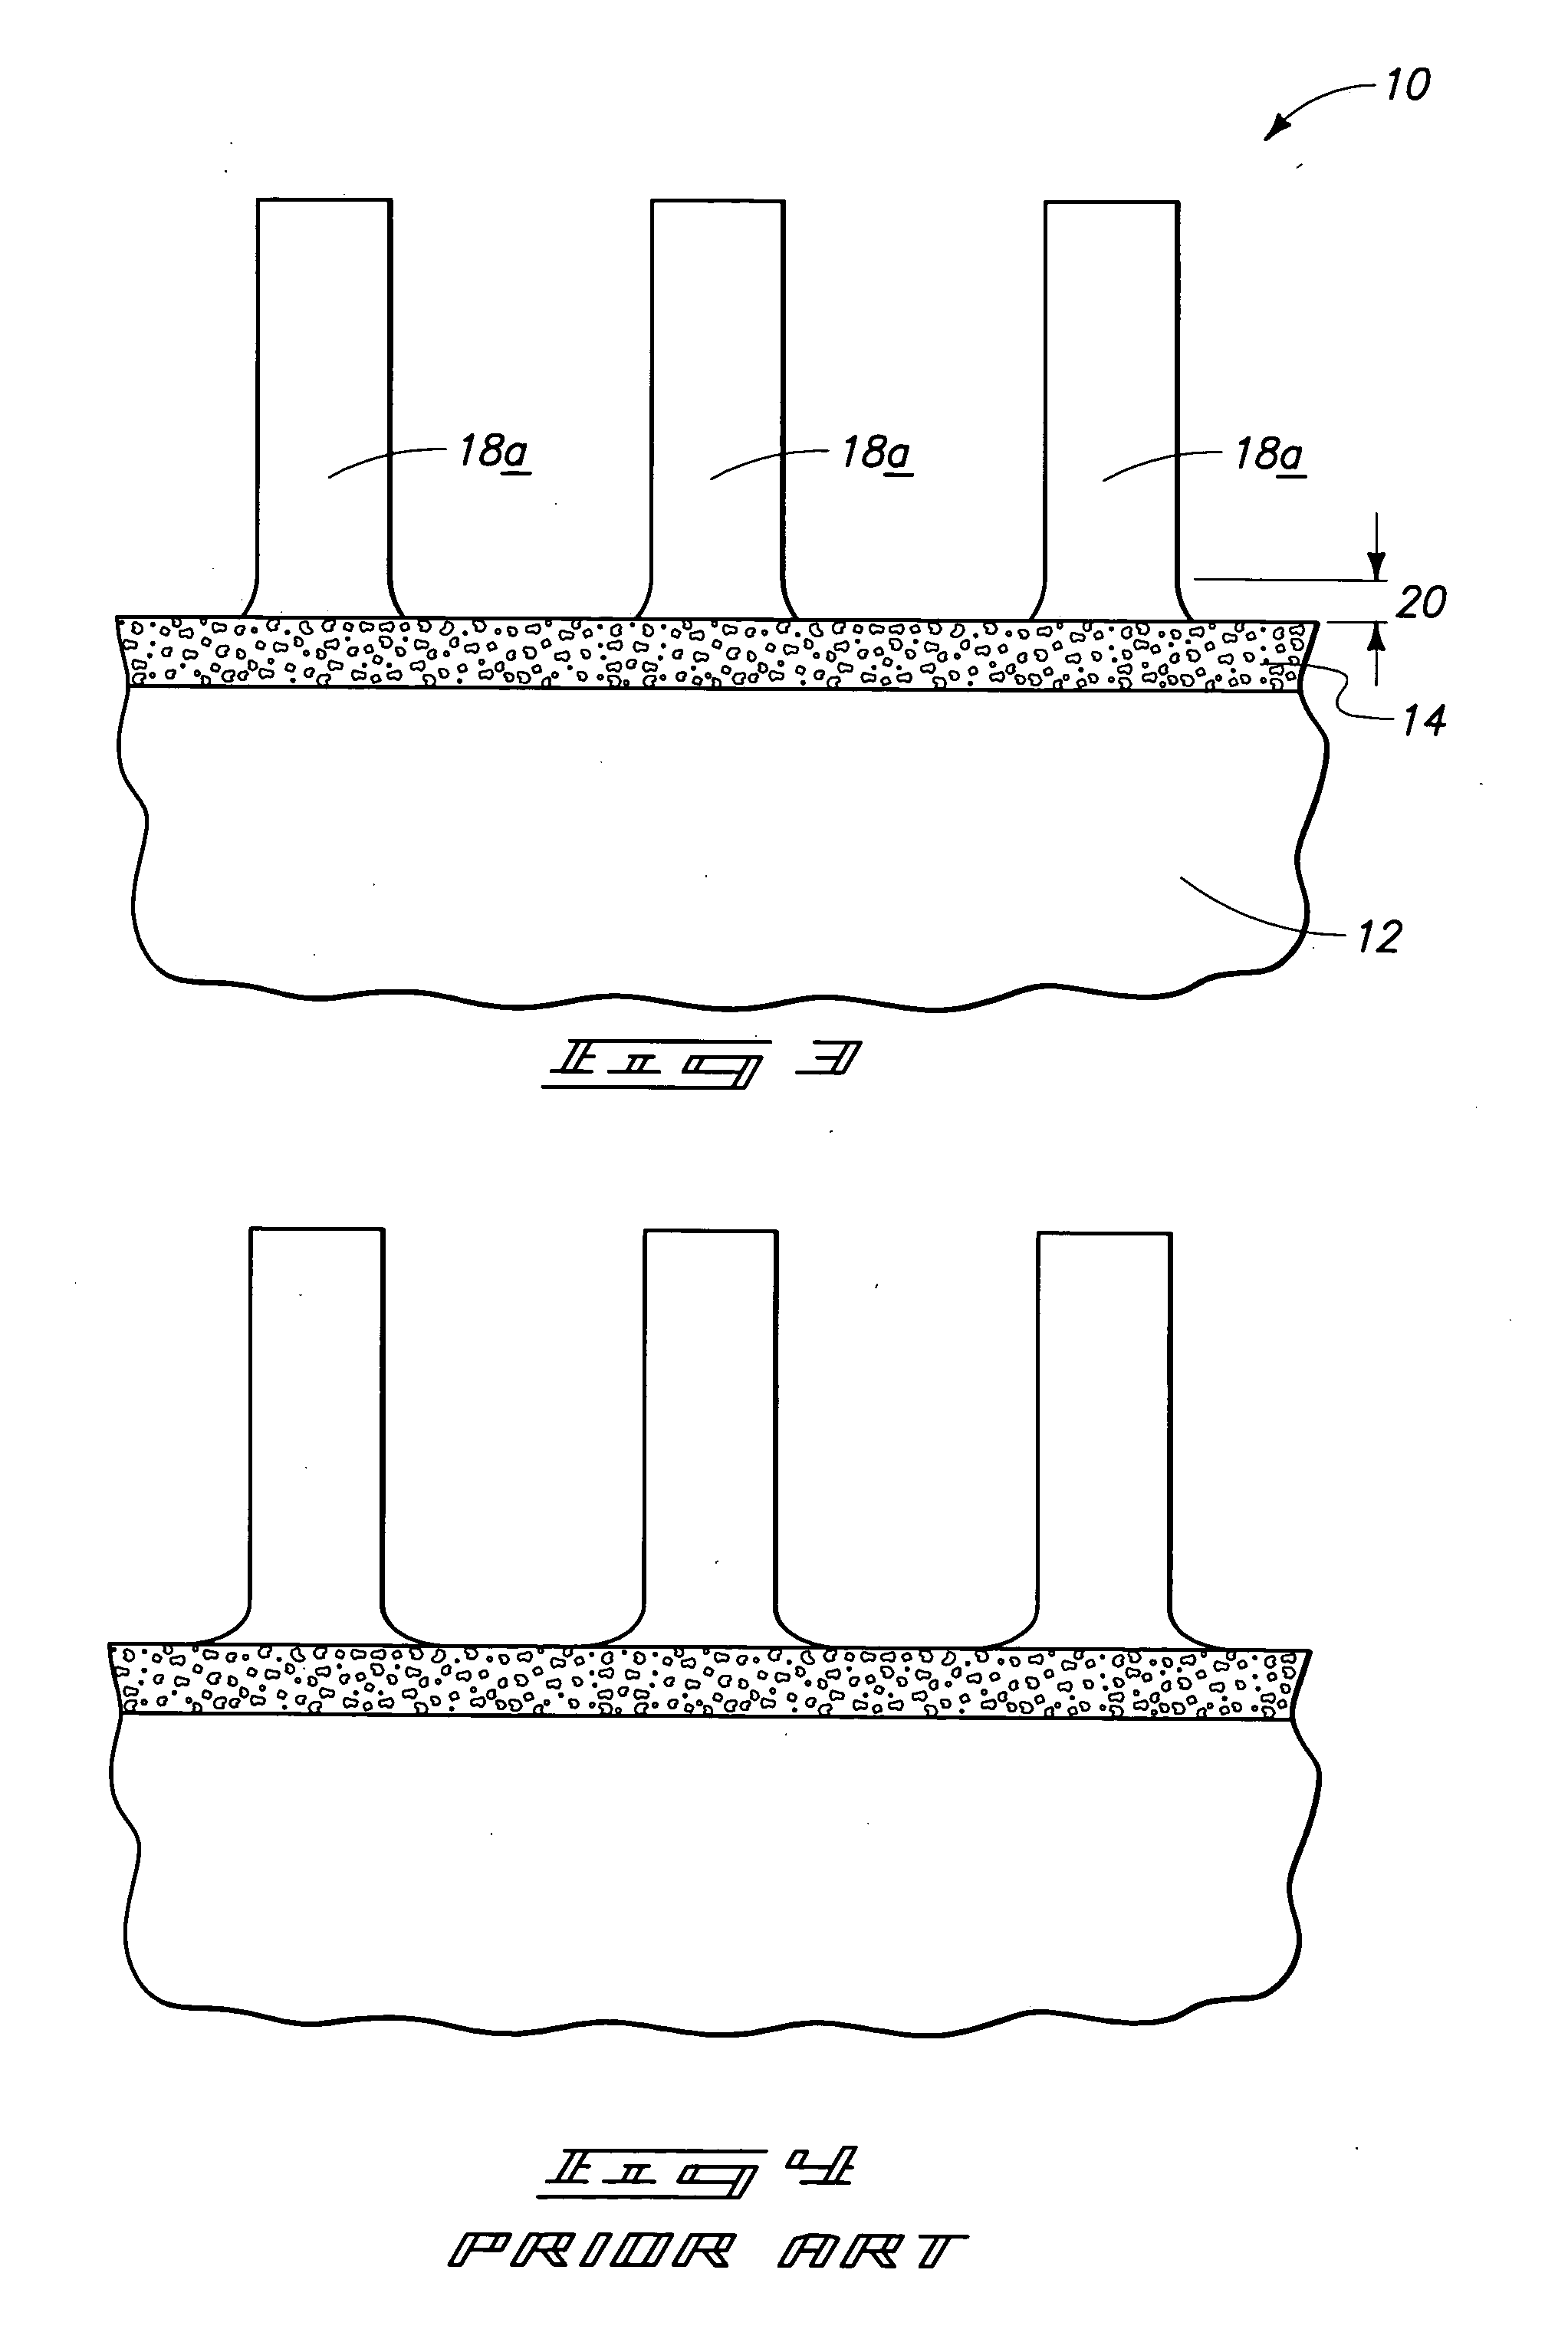 Methods of forming patterned photoresist layers over semiconductor substrates